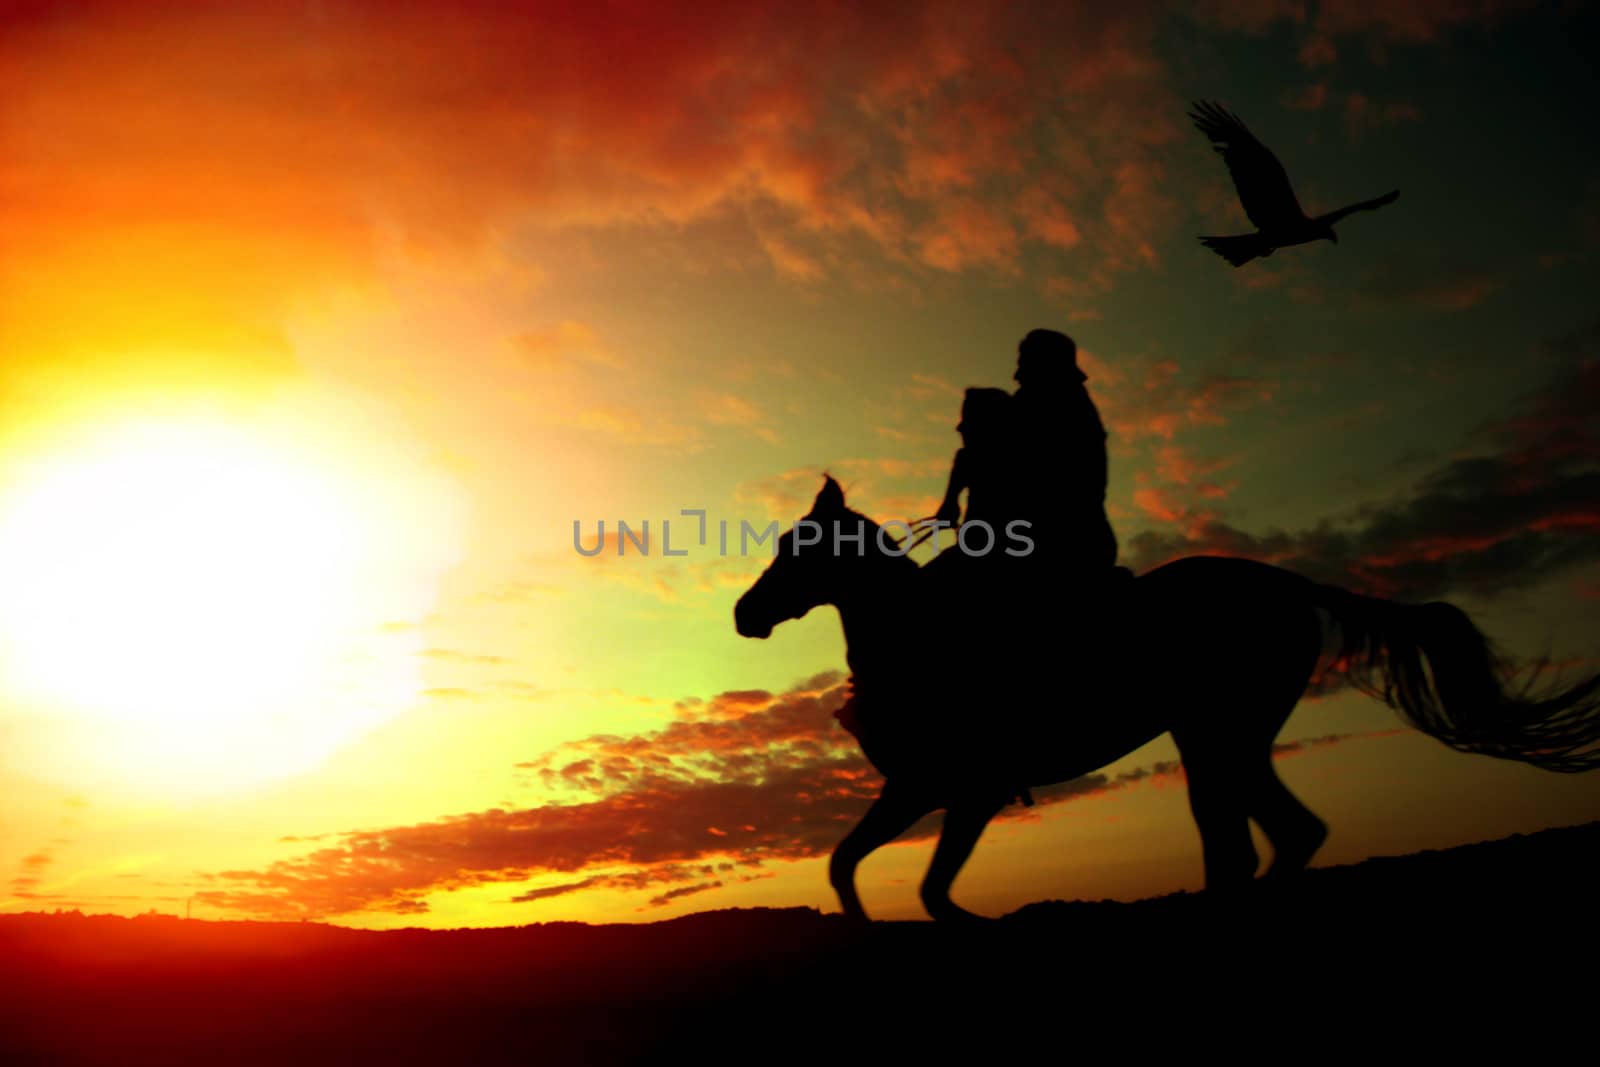 A silhouette of a father and daughter riding home on their horse in the evening